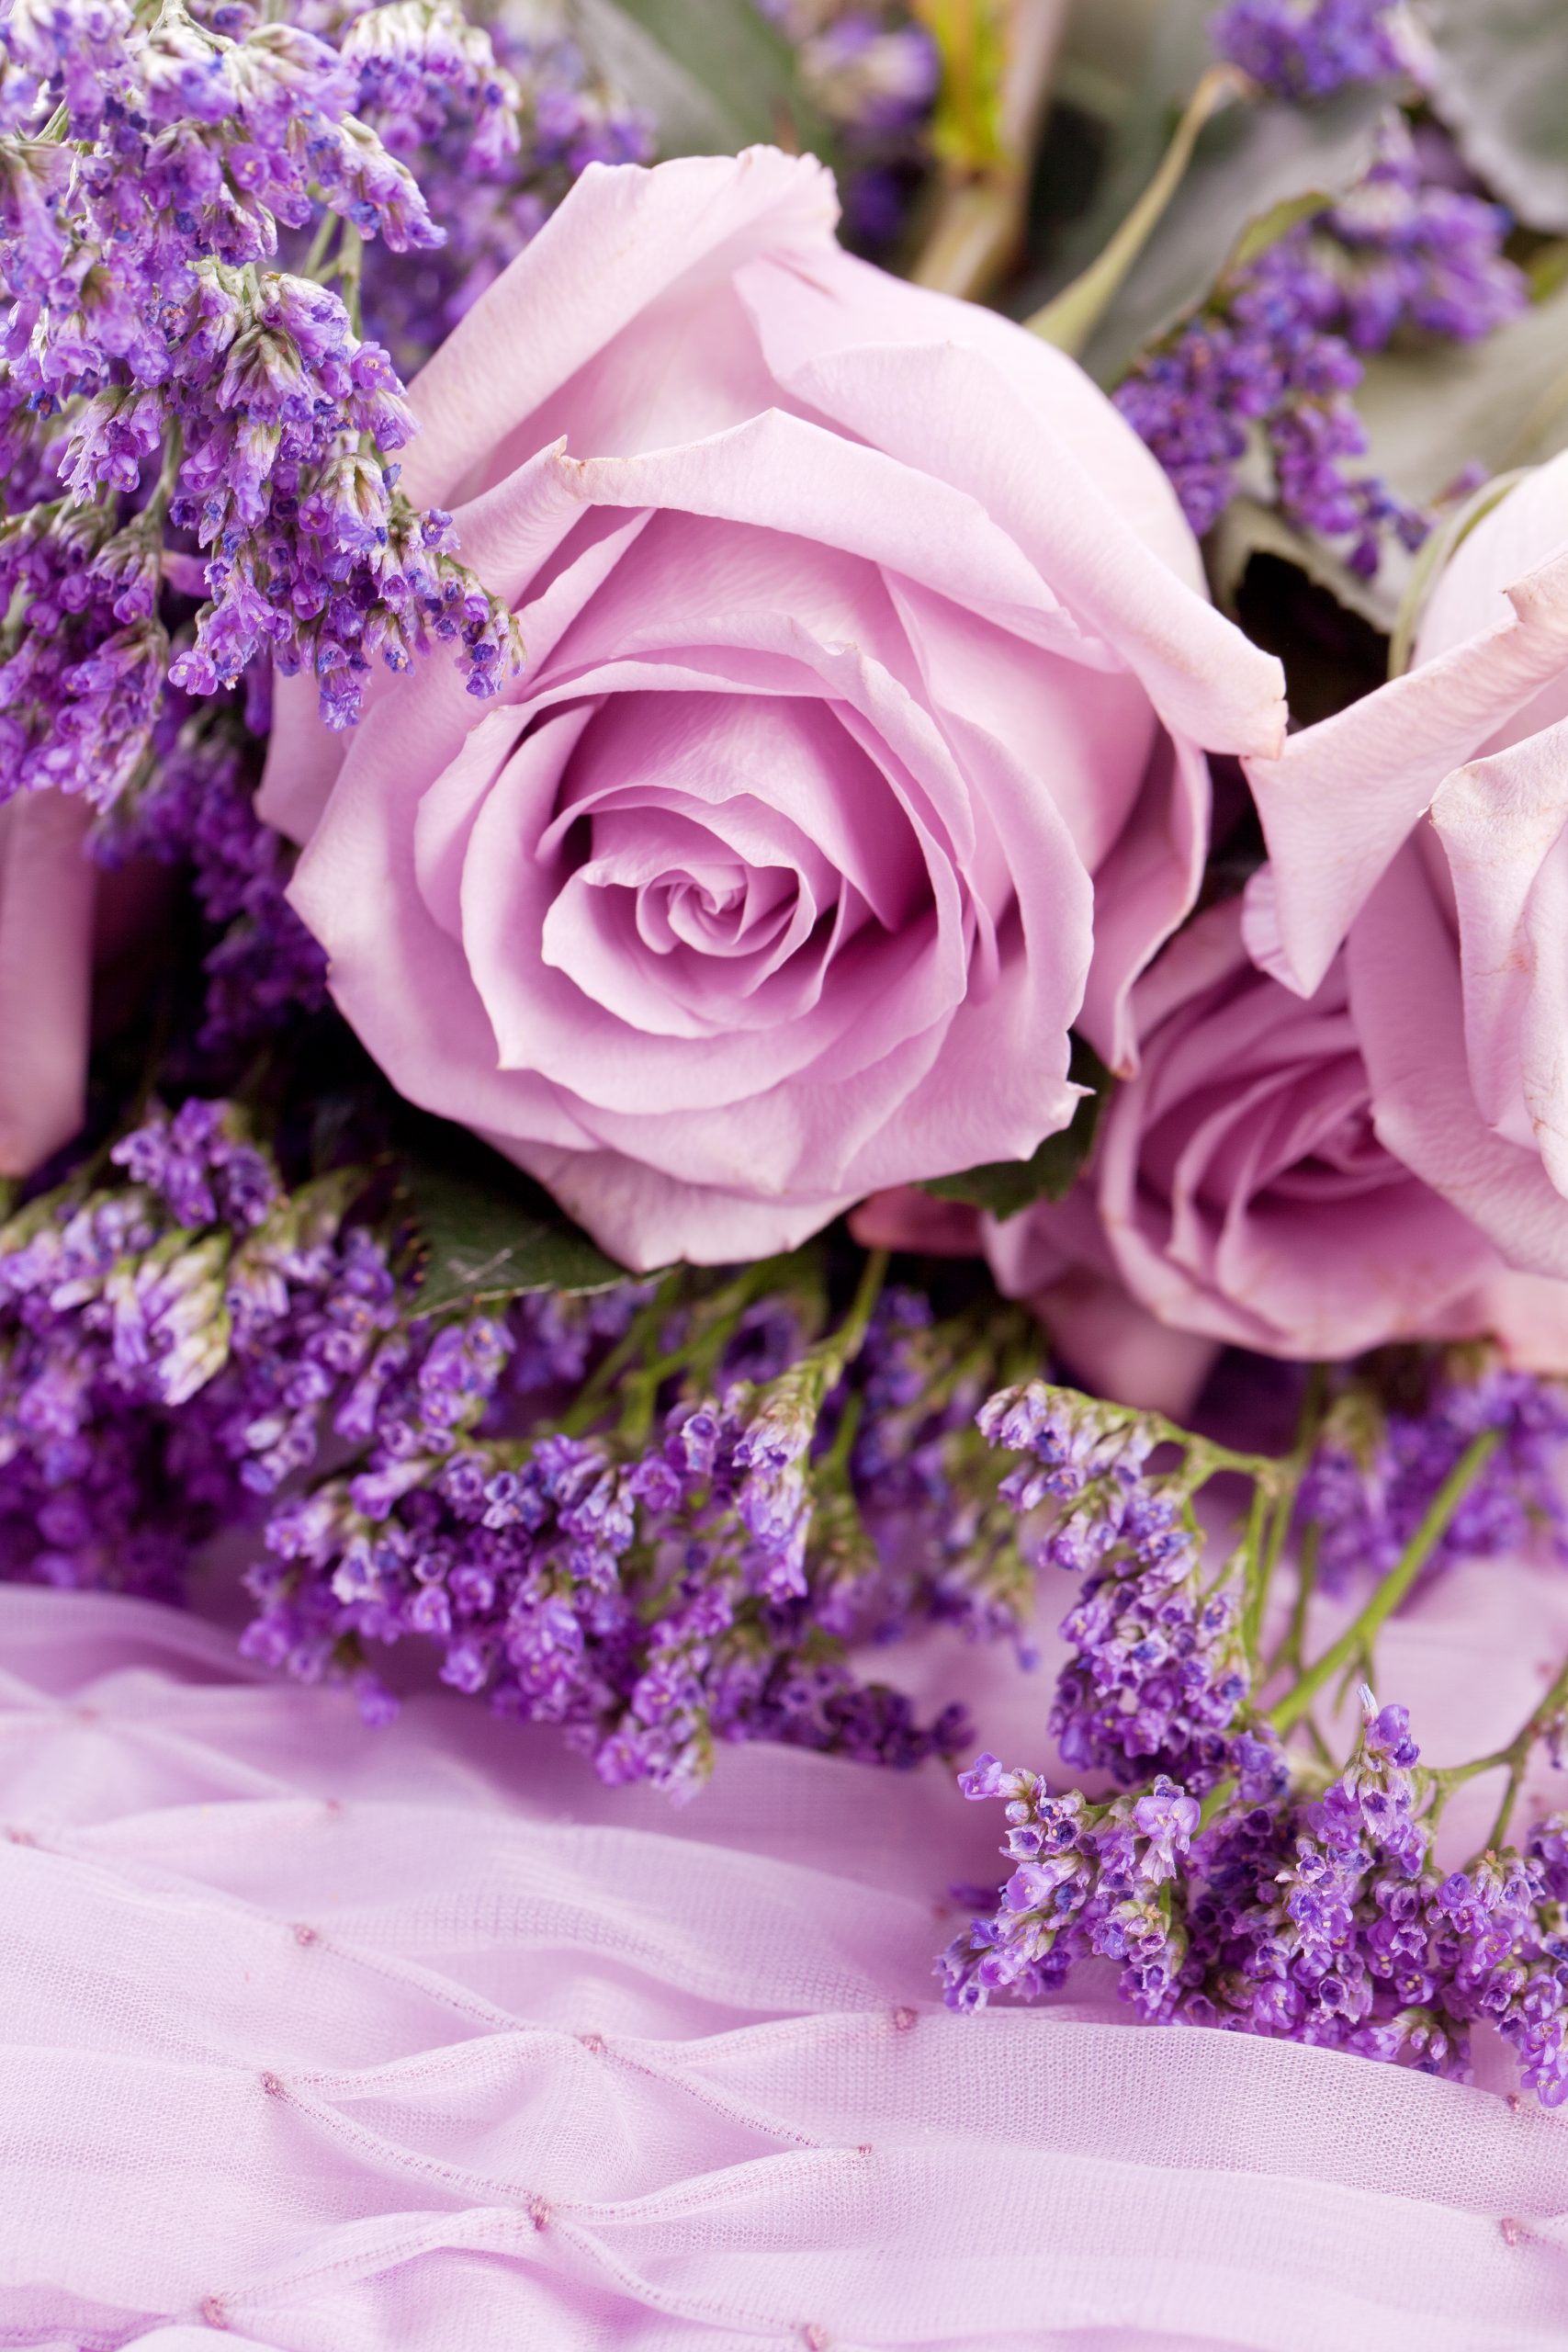 Image of Lavender and roses flowers